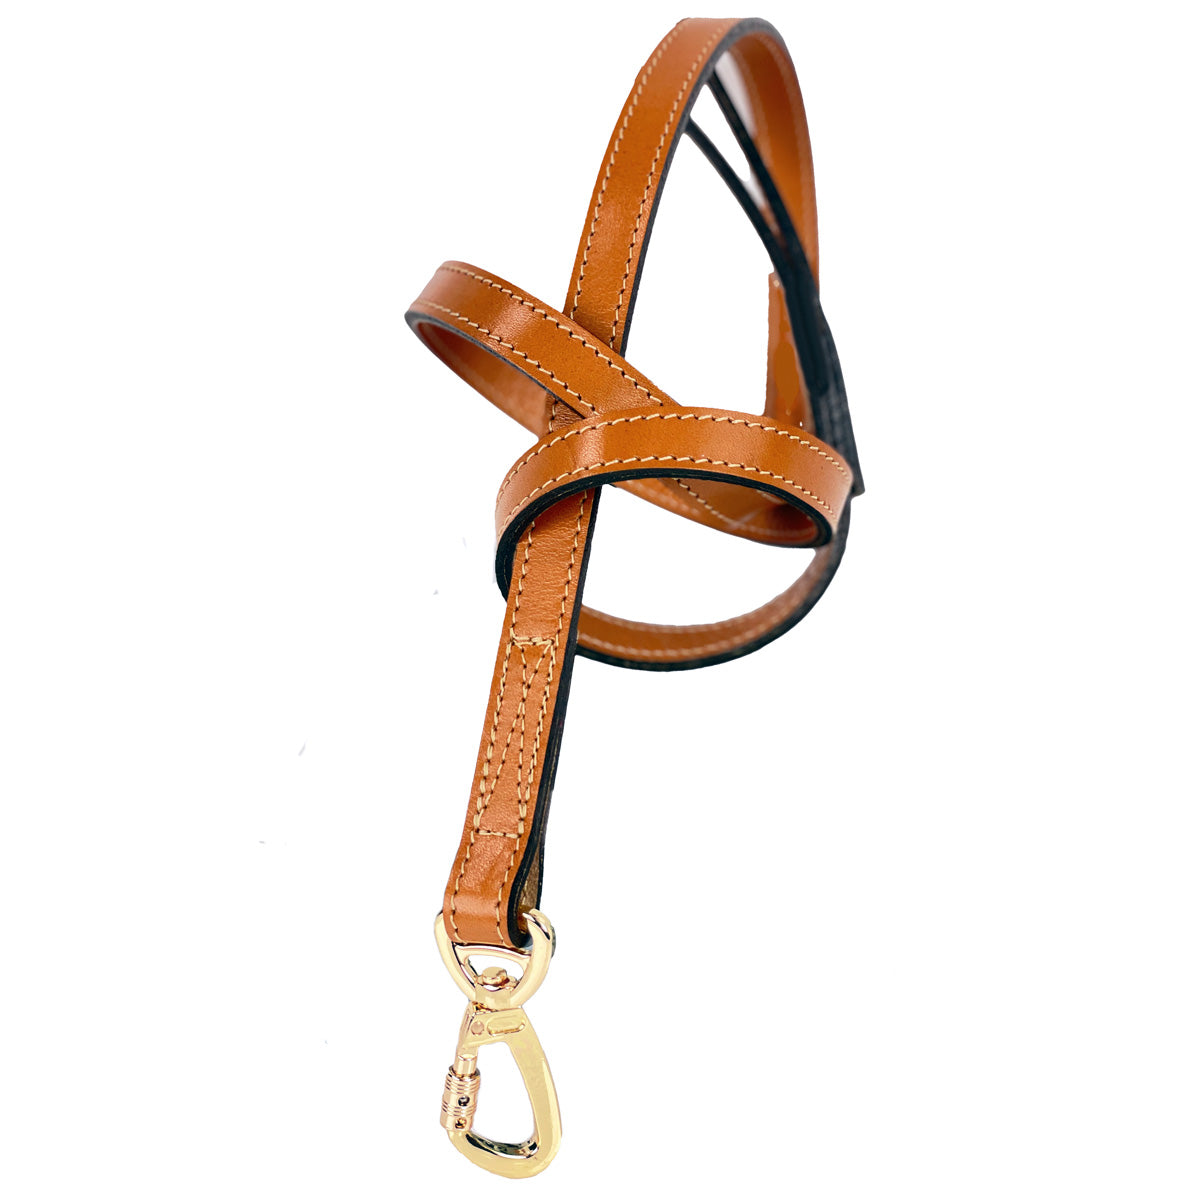 Leap Frog Dog Leash in Tan & Gold